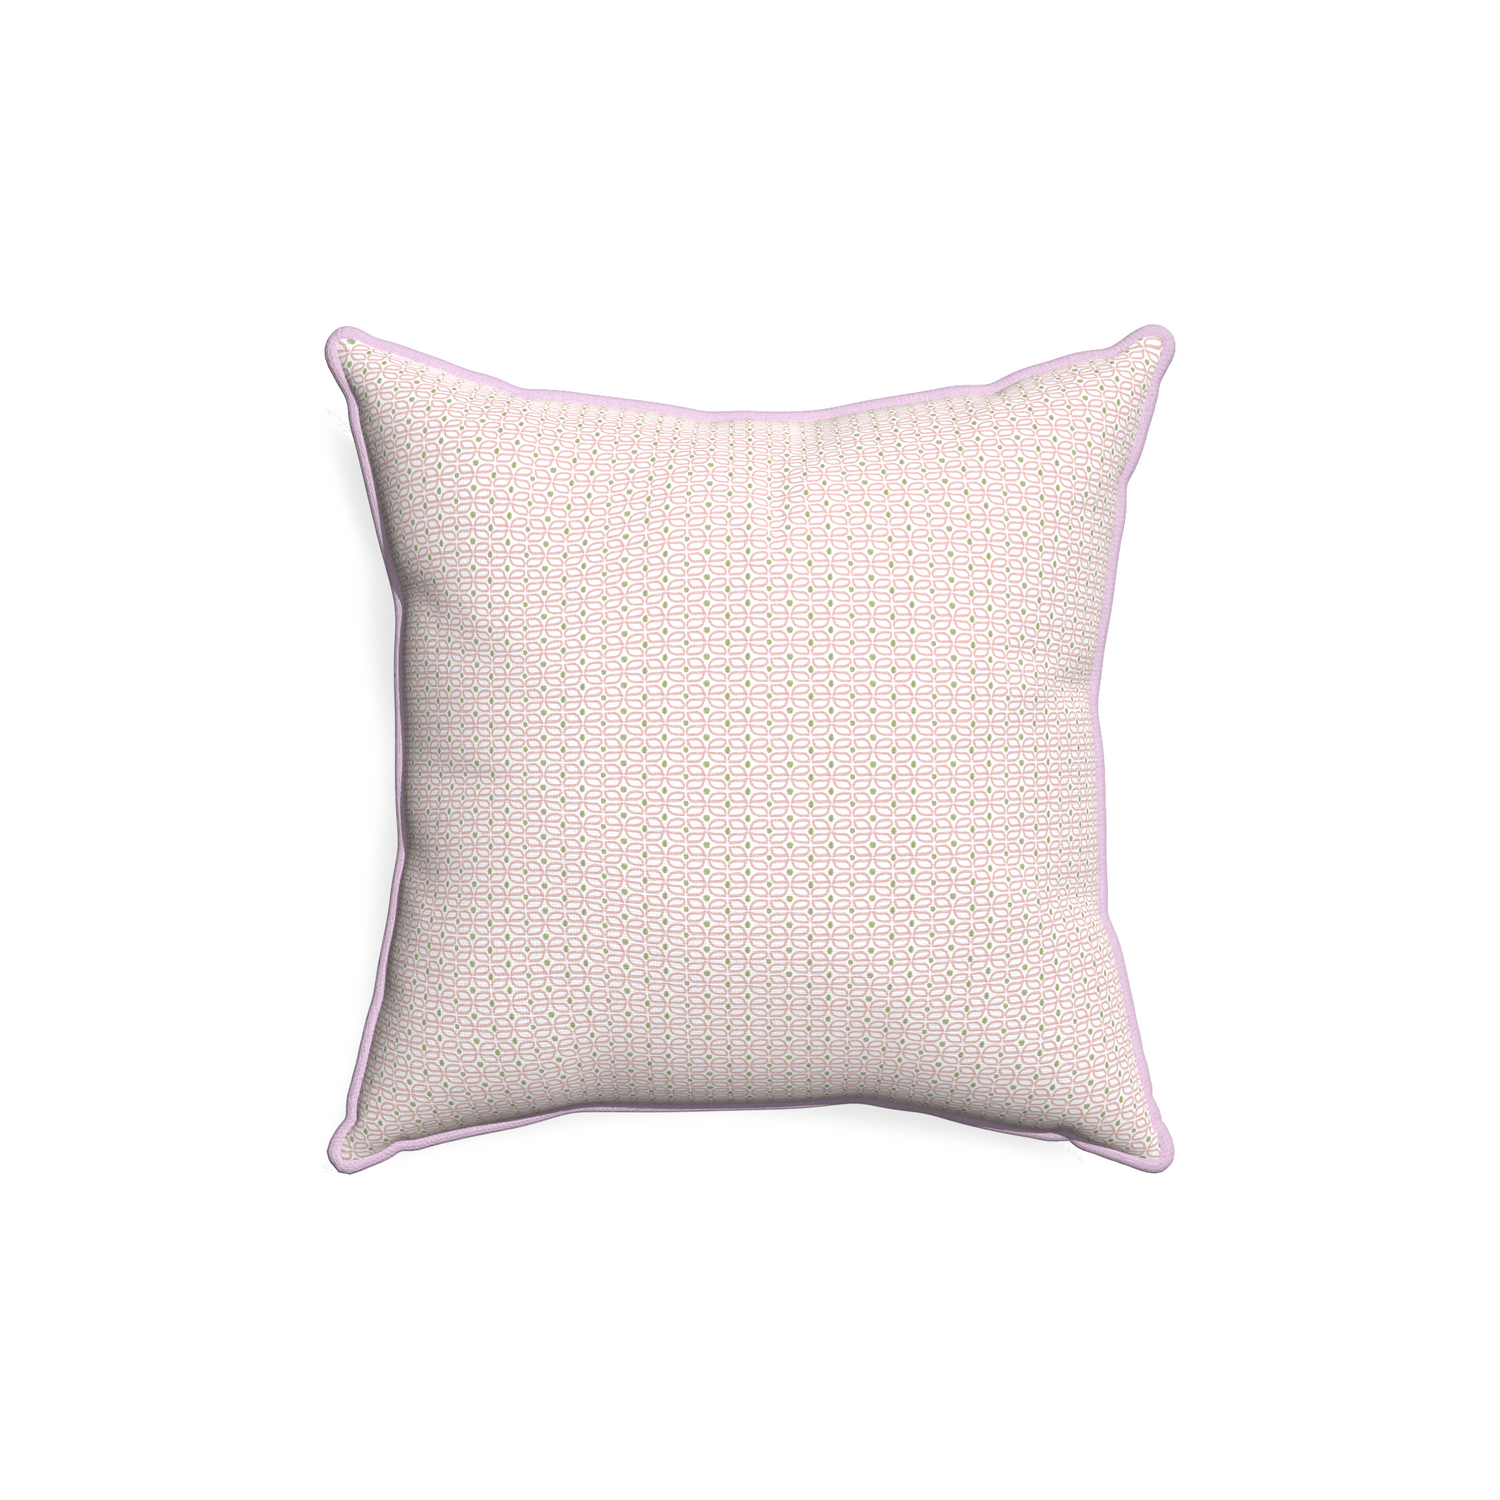 18-square loomi pink custom pink geometricpillow with l piping on white background